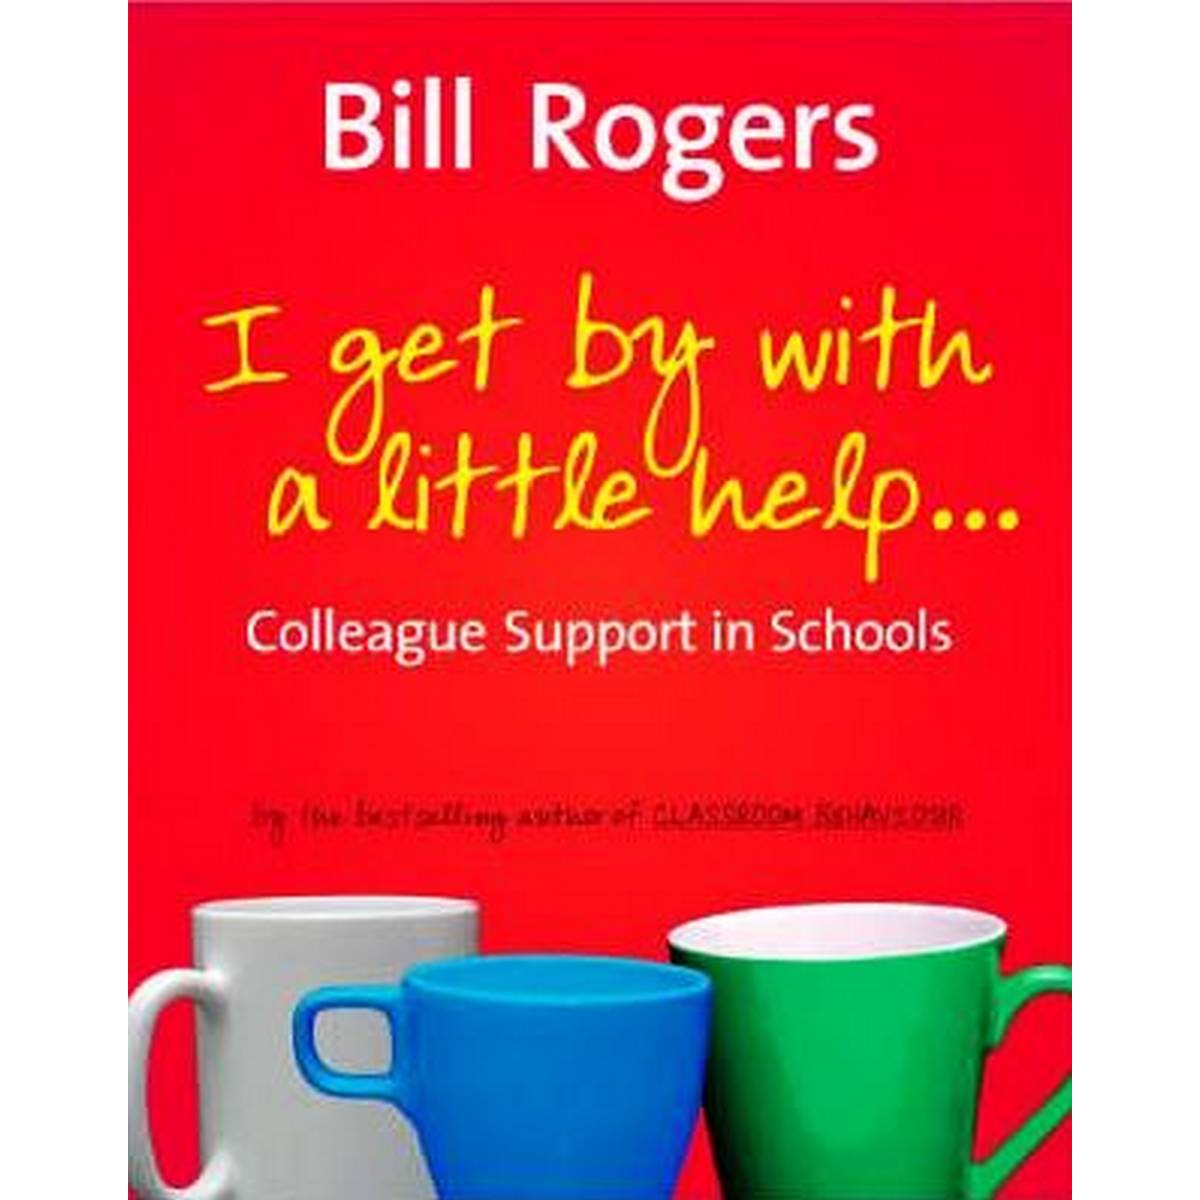 I get by with a little help...Colleague Support in Schools